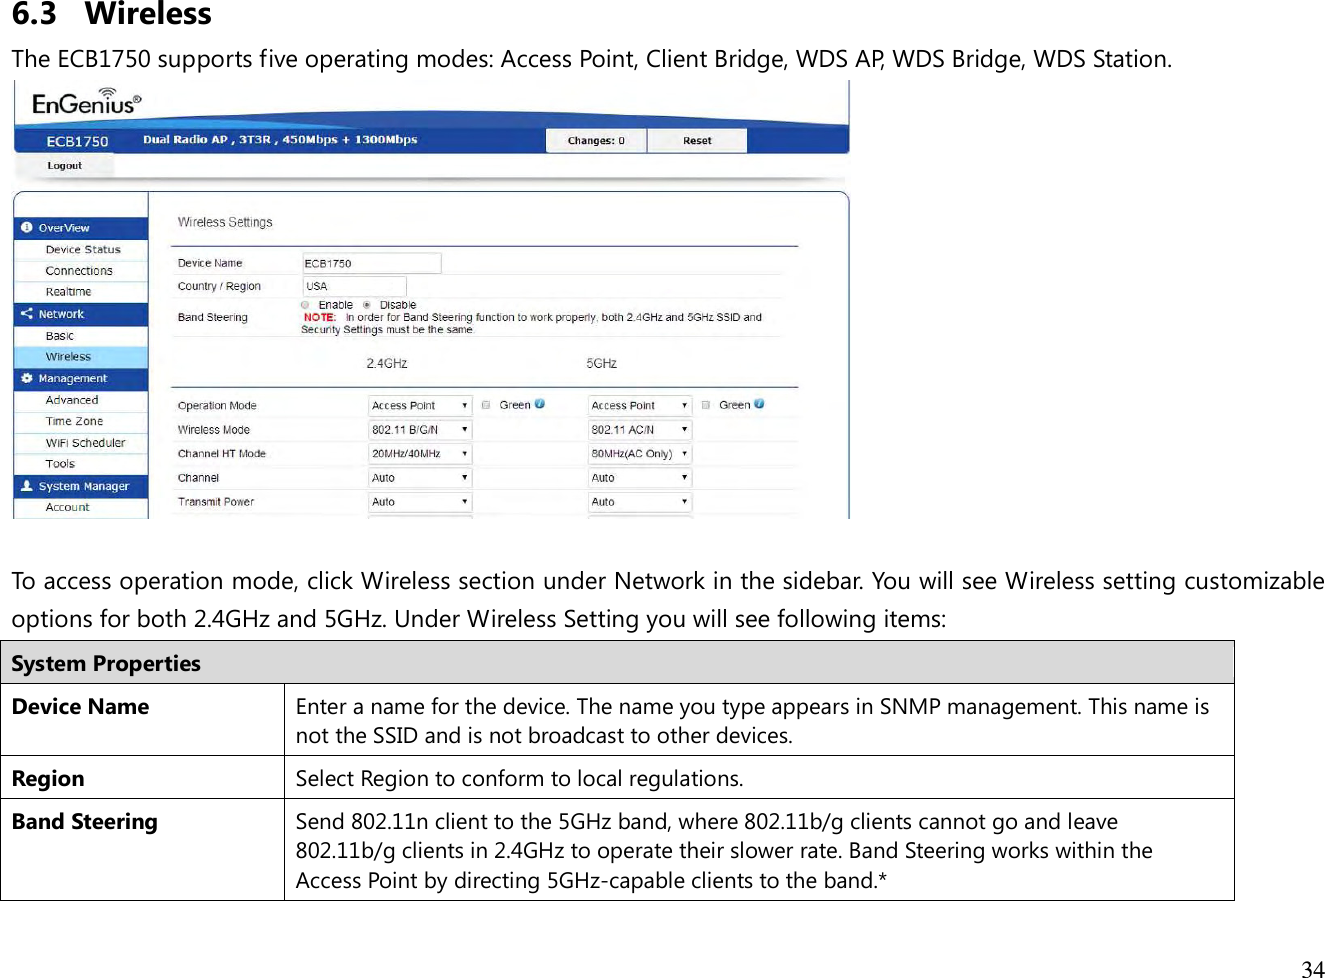  34  6.3 Wireless The ECB1750 supports five operating modes: Access Point, Client Bridge, WDS AP, WDS Bridge, WDS Station.   To access operation mode, click Wireless section under Network in the sidebar. You will see Wireless setting customizable options for both 2.4GHz and 5GHz. Under Wireless Setting you will see following items: System Properties Device Name Enter a name for the device. The name you type appears in SNMP management. This name is not the SSID and is not broadcast to other devices. Region Select Region to conform to local regulations. Band Steering Send 802.11n client to the 5GHz band, where 802.11b/g clients cannot go and leave 802.11b/g clients in 2.4GHz to operate their slower rate. Band Steering works within the Access Point by directing 5GHz-capable clients to the band.* 